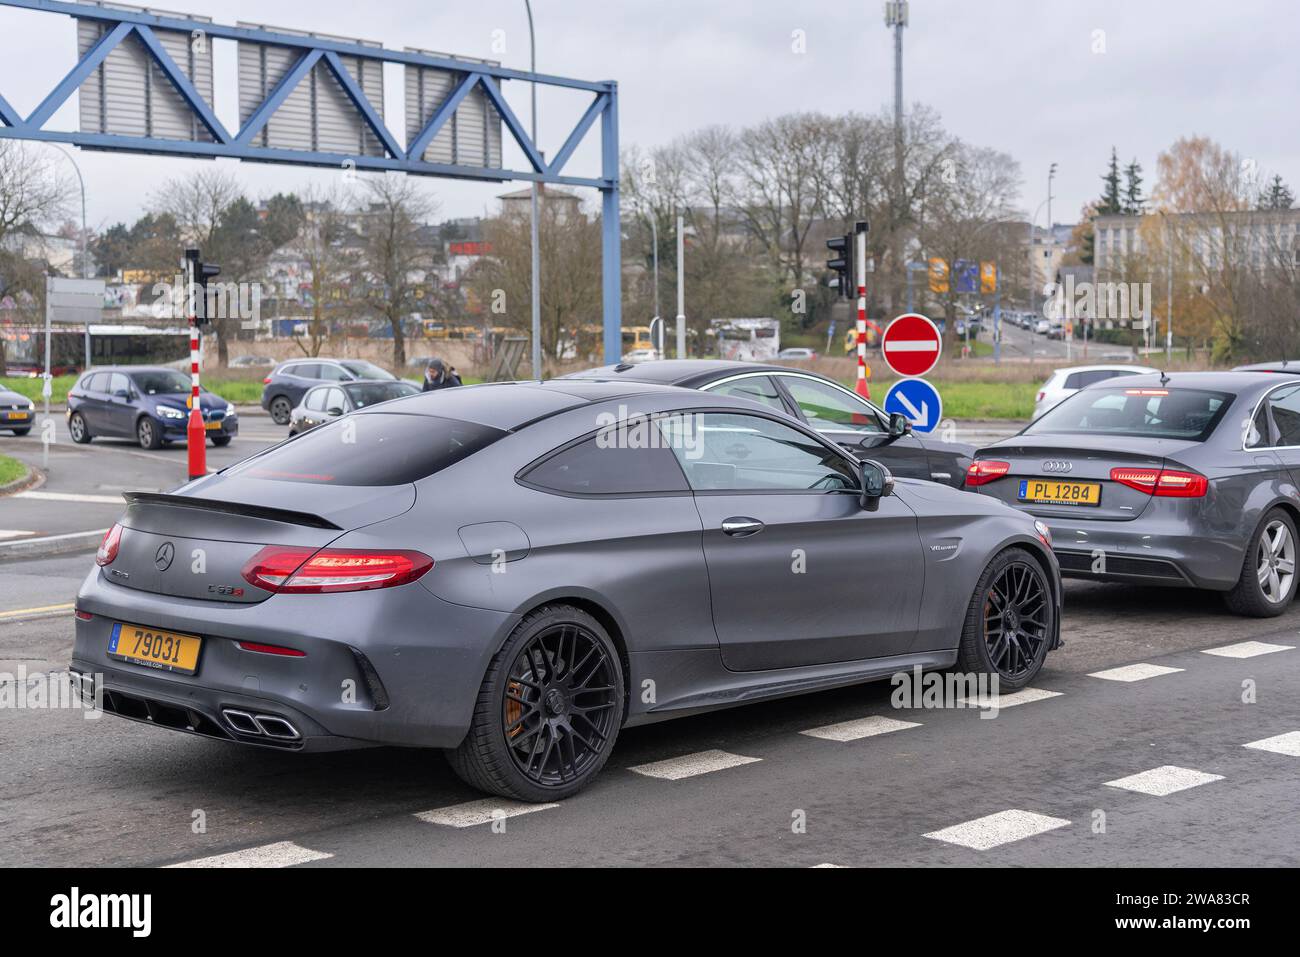 Luxembourg City, Luxembourg - Matte grey Mercedes-AMG C63 S Coupé driving in a street in the middle of traffic. Stock Photo